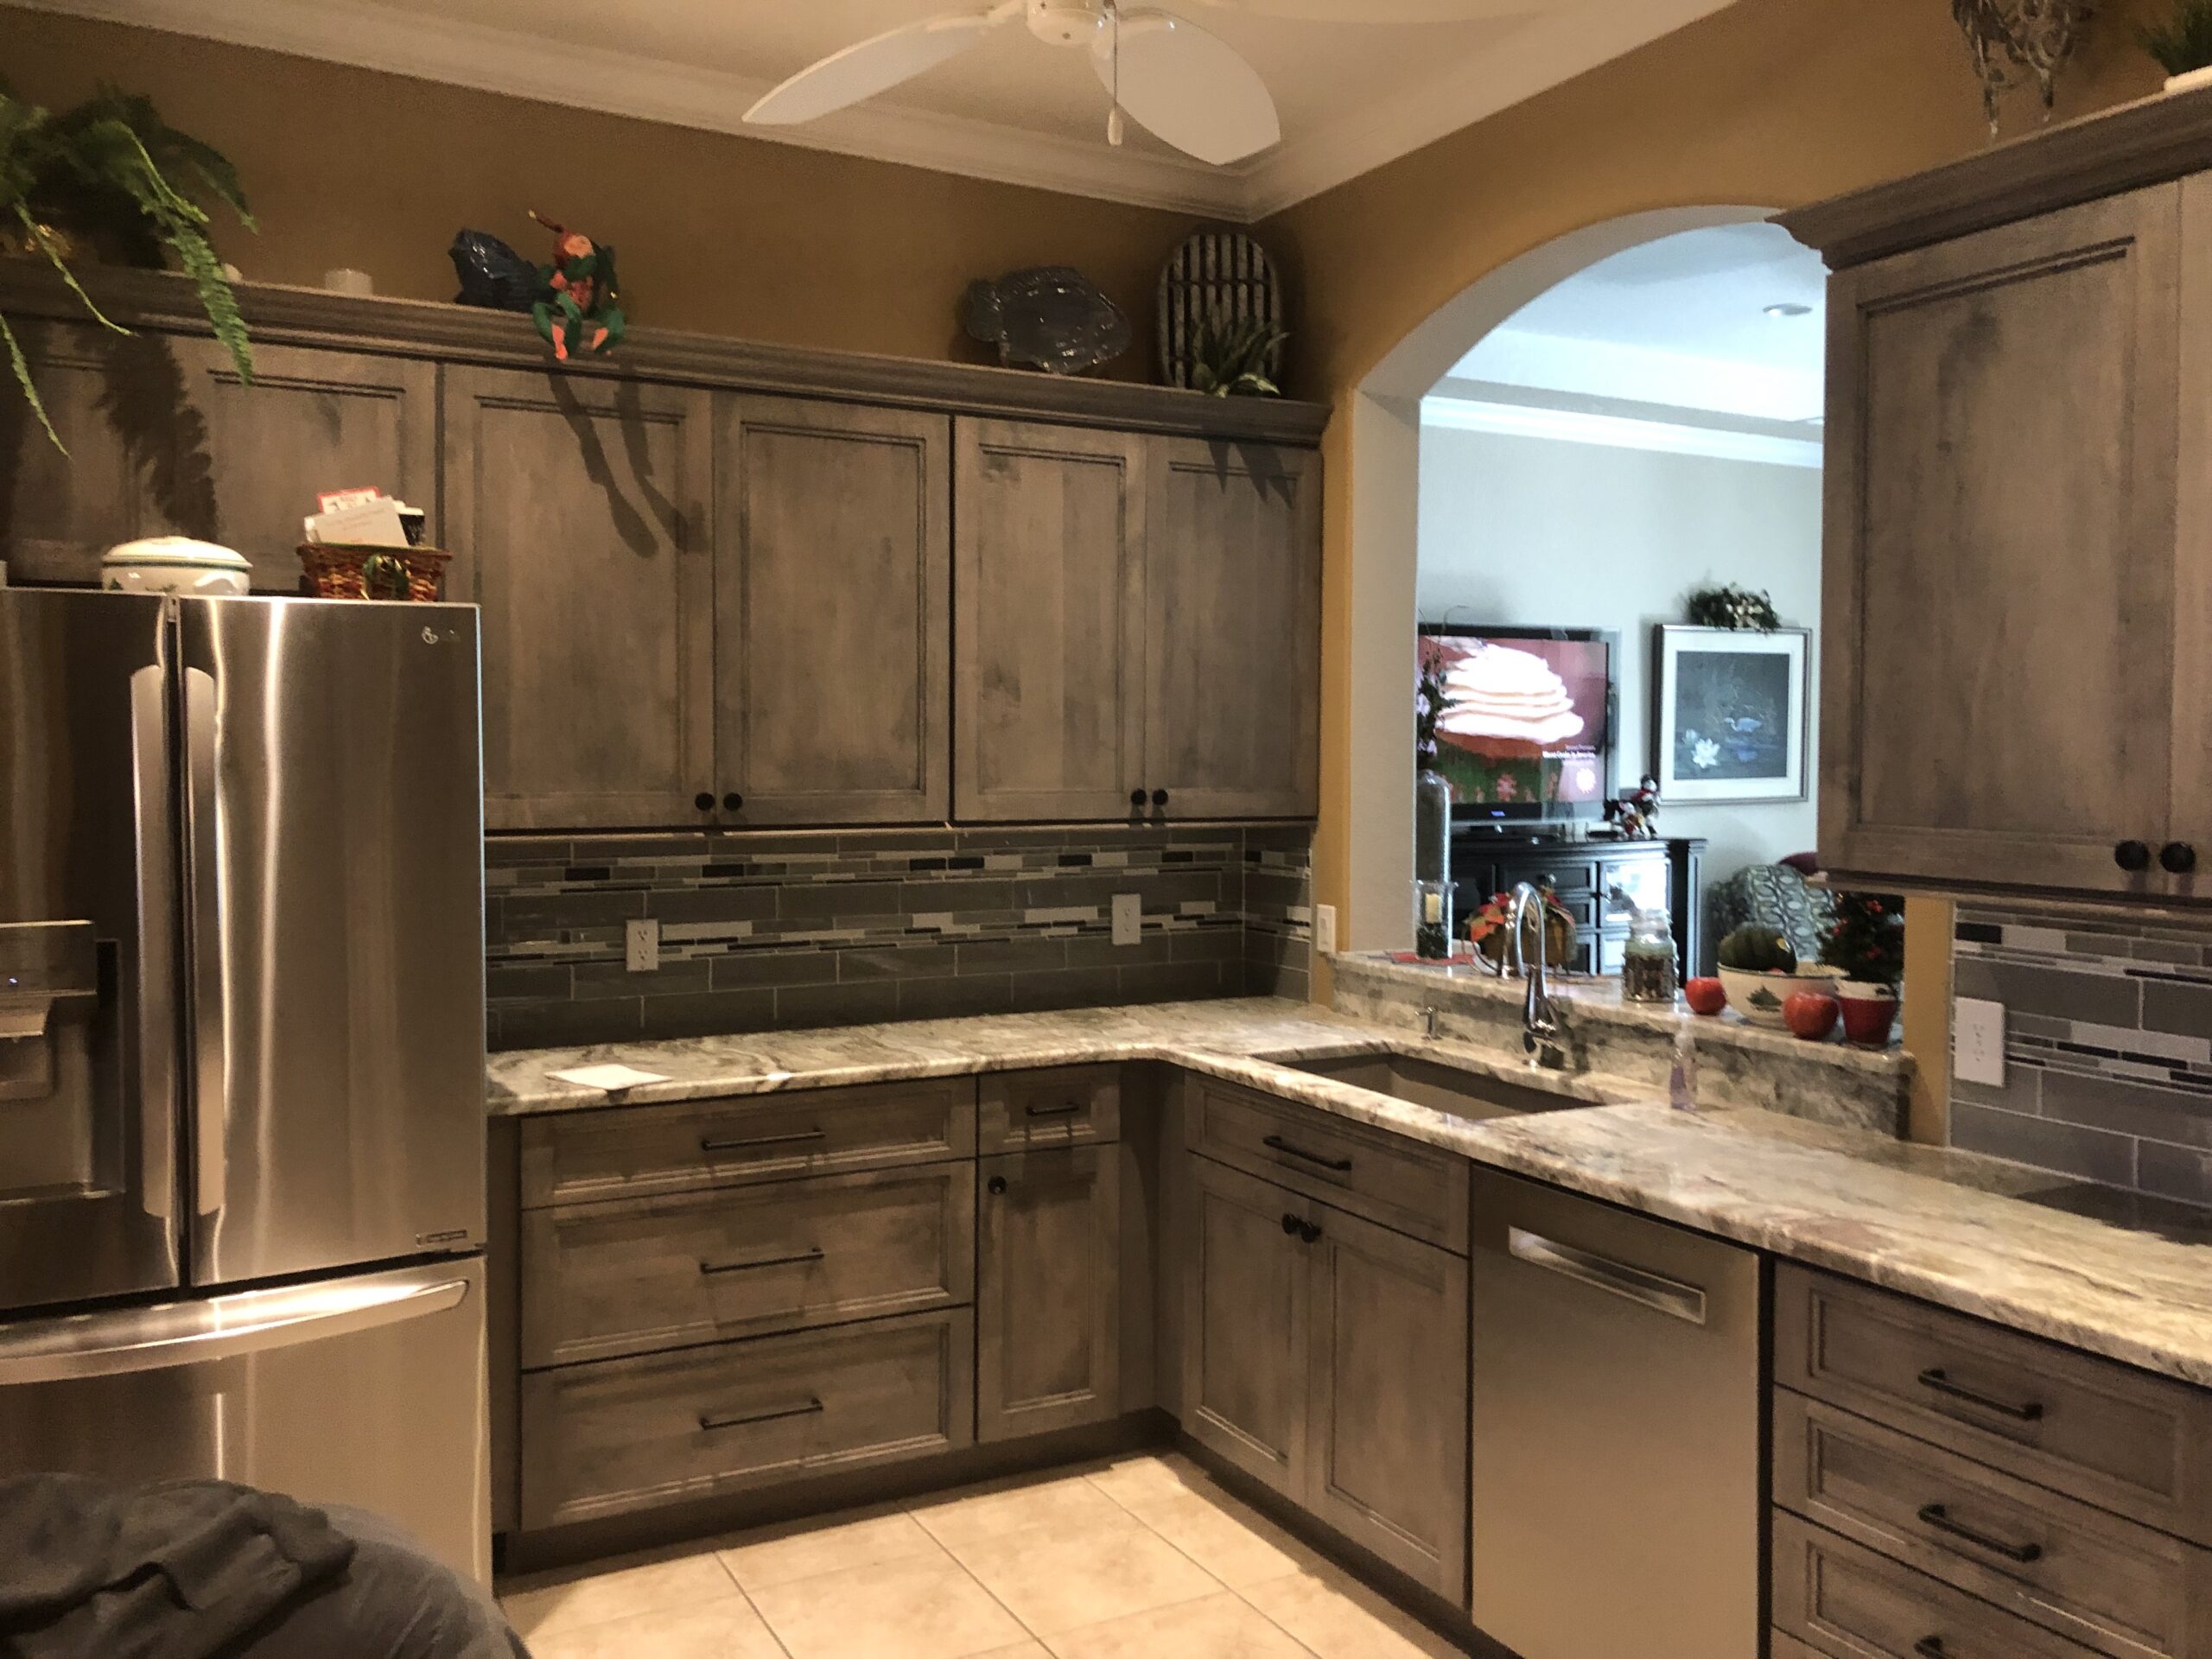 Modern, Stylish, and High Quality Stained Cherry Kitchen Cabinet Refacing in Bloomingdale